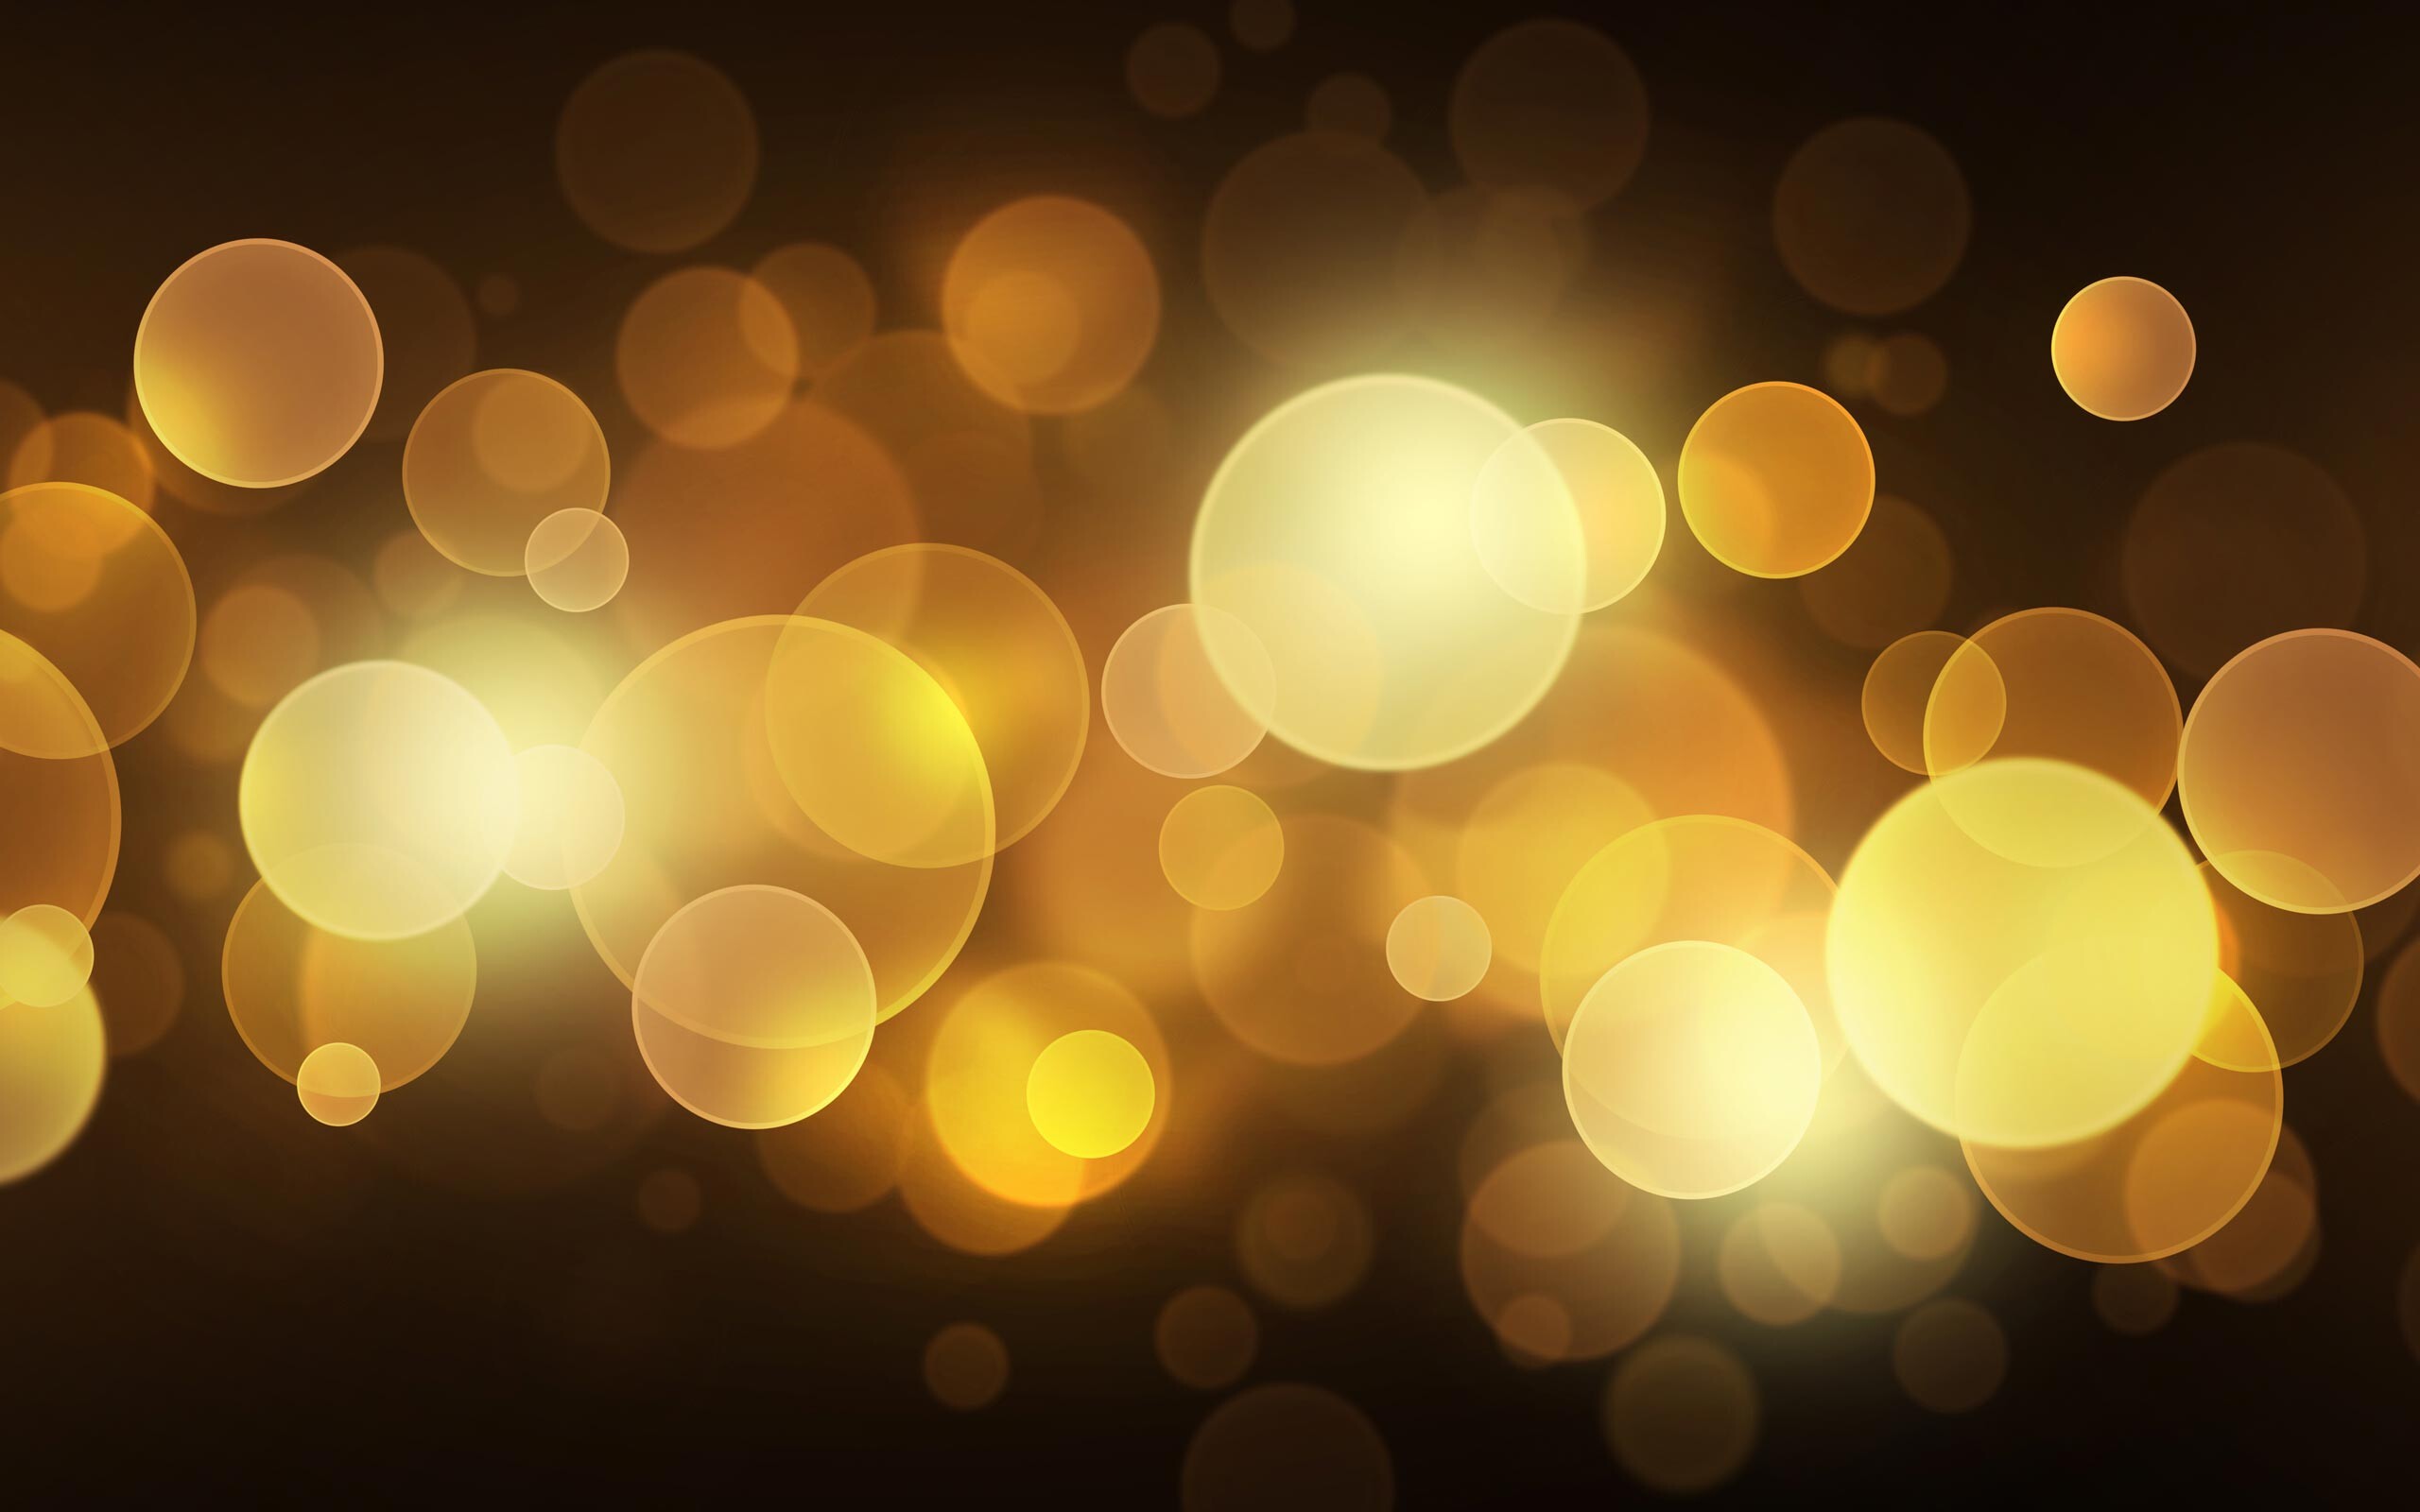 Gold Lights: Blurred abstract light through the window glass, Bokeh effect, Tints and shades. 2560x1600 HD Background.